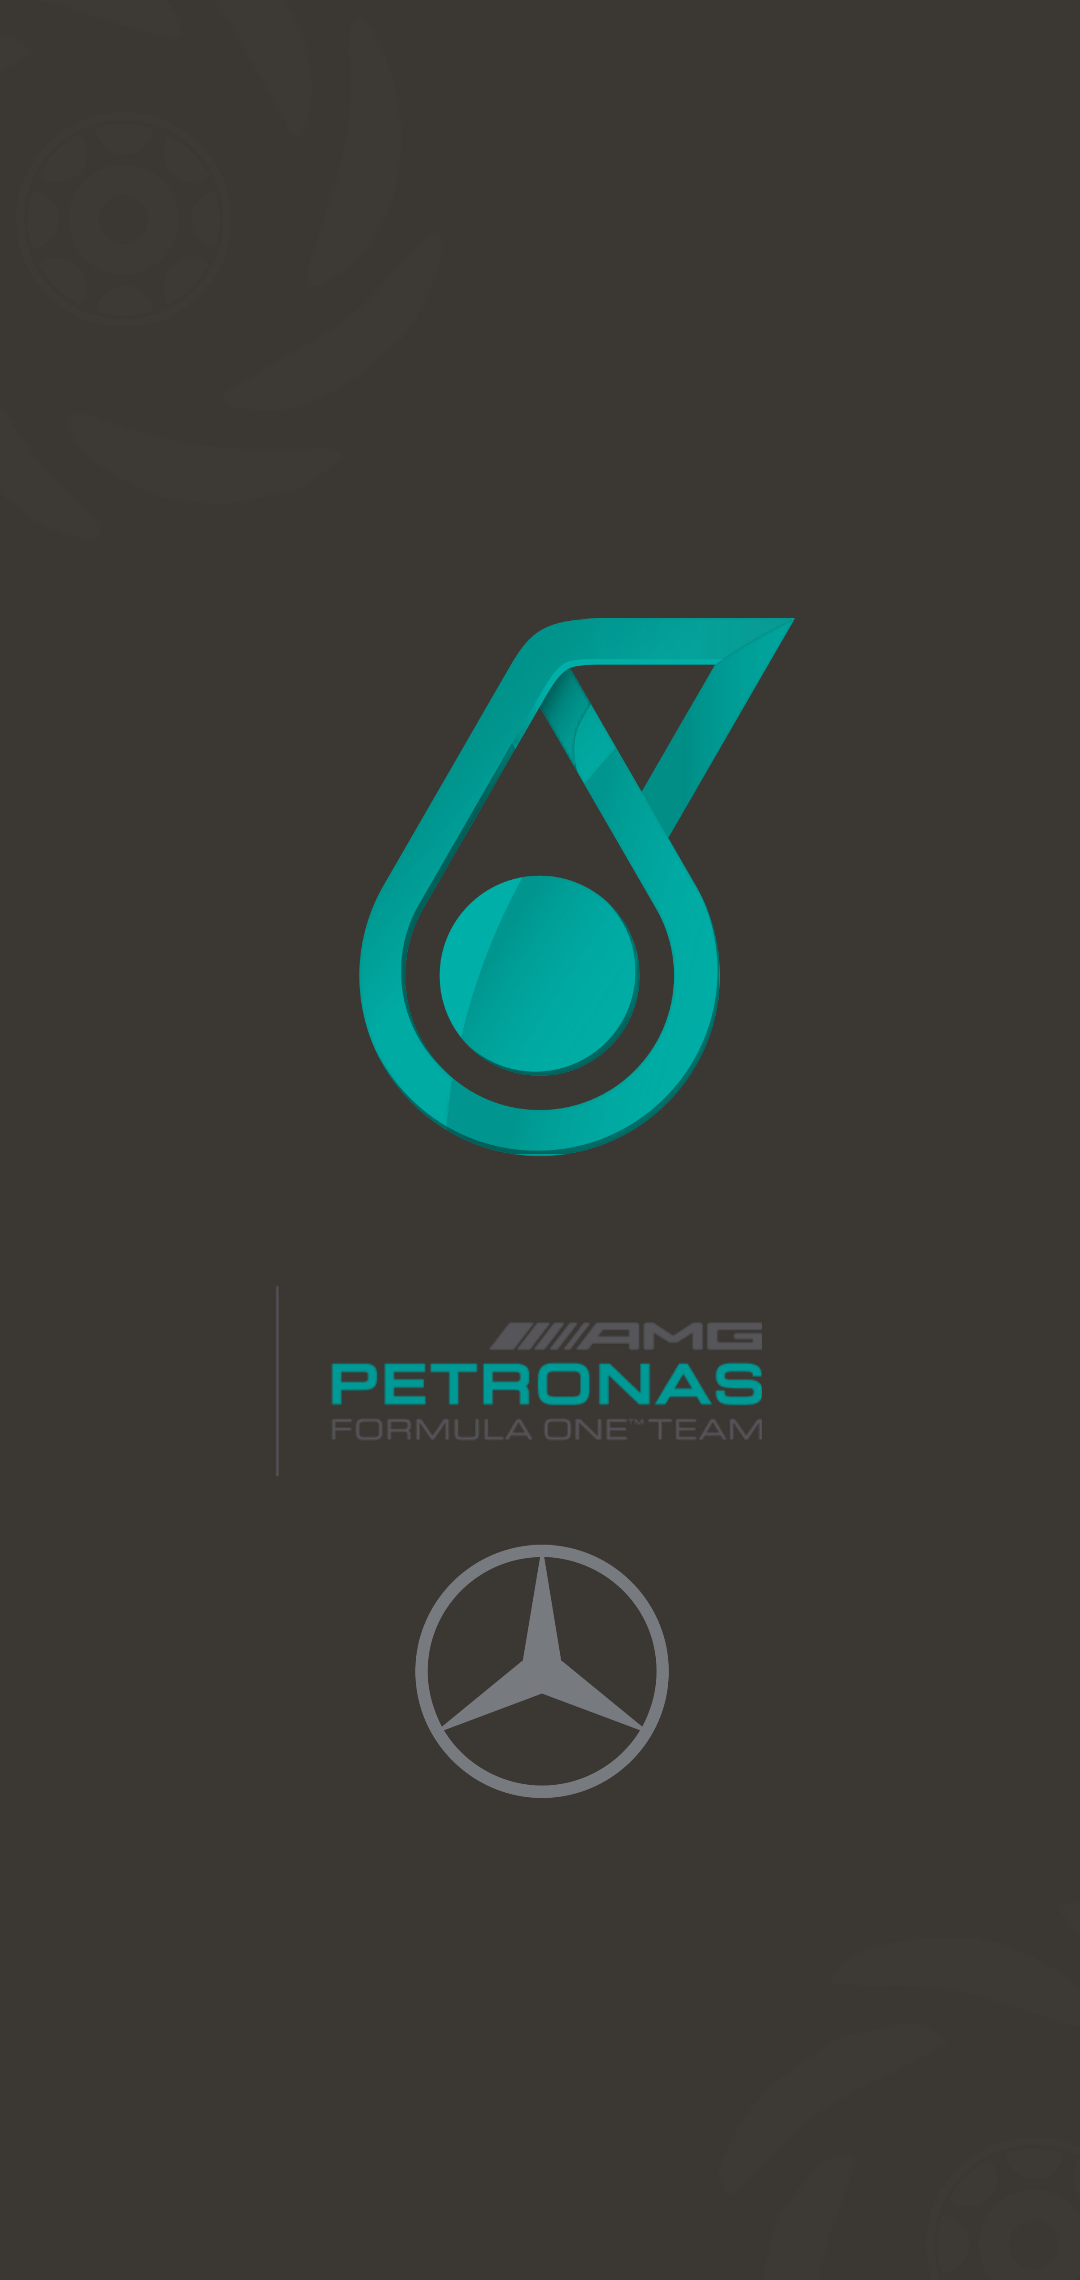 Wanted to share this Mercedez Petronas wallpaper I did. More